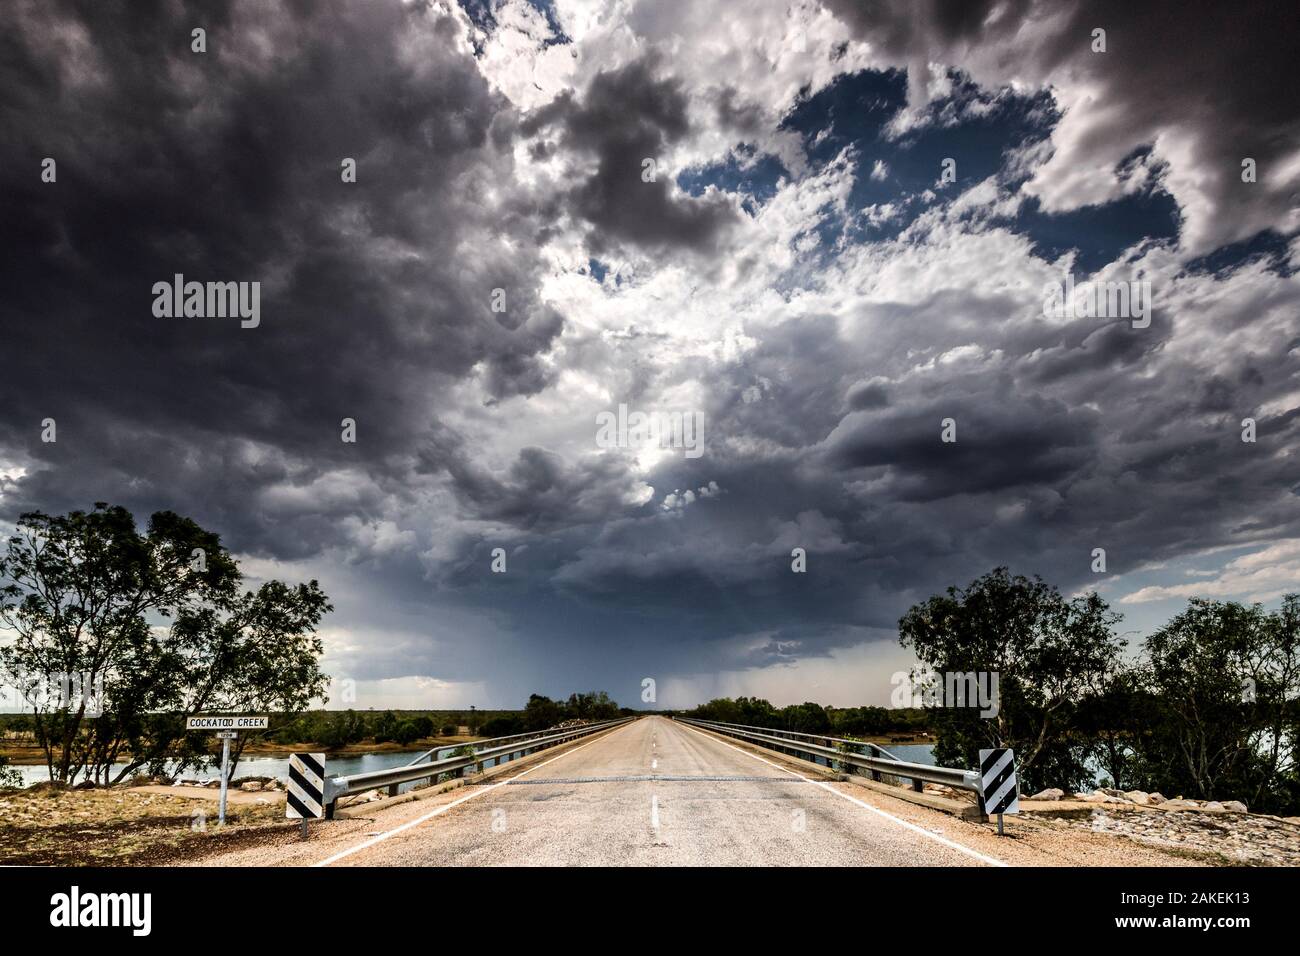 Storm clouds  with rain falling and road bridge in Western Australia, October 2013. Stock Photo